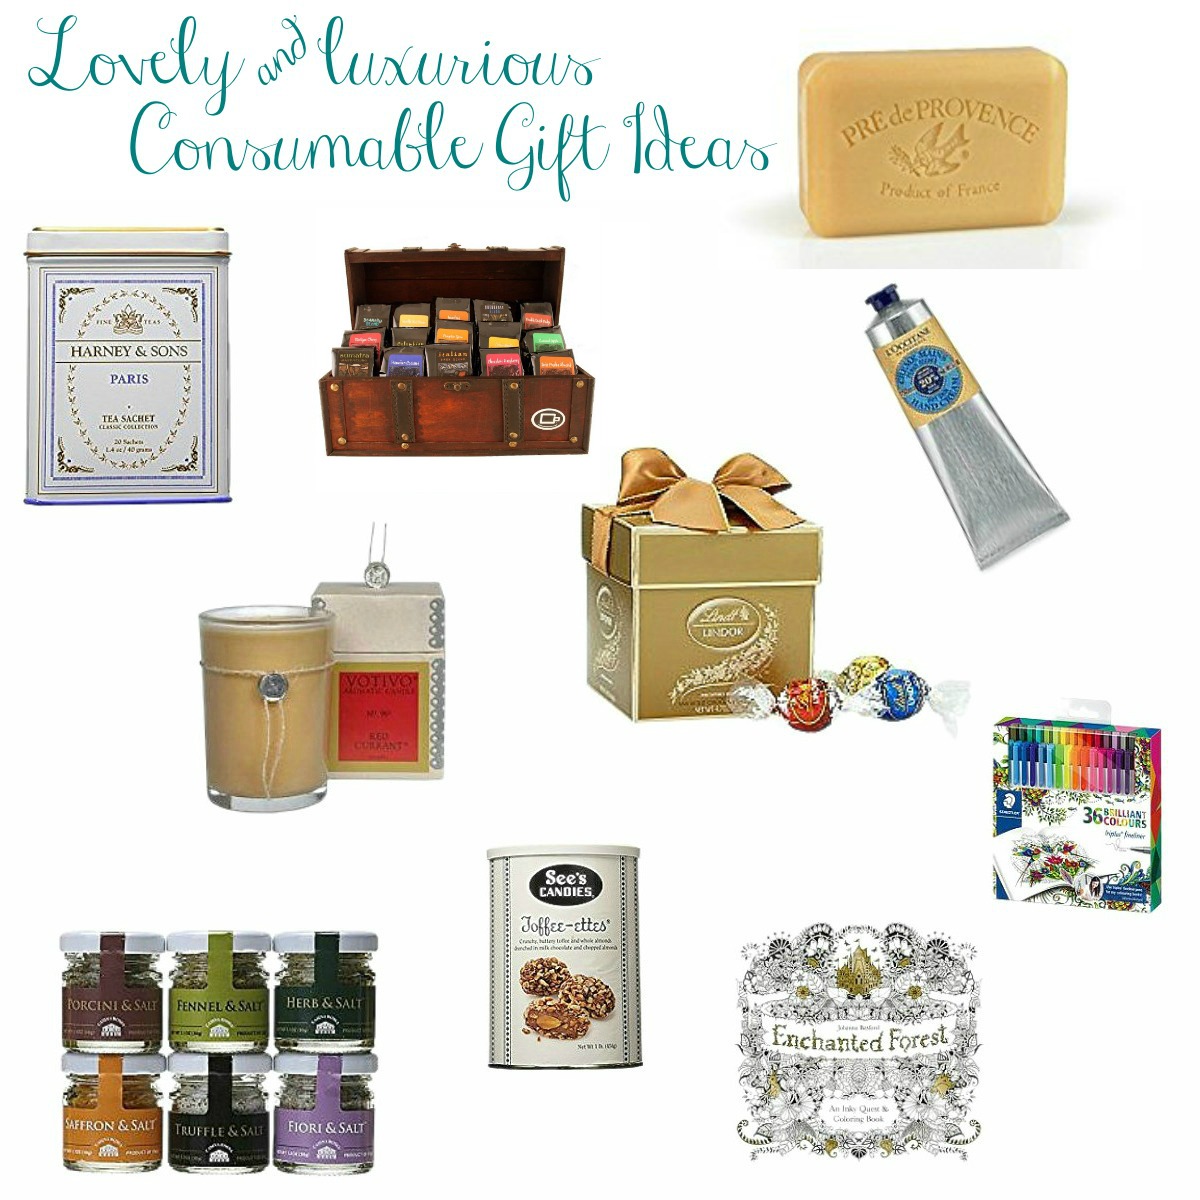 lovely-and-luxurious-consumable-gift-ideas